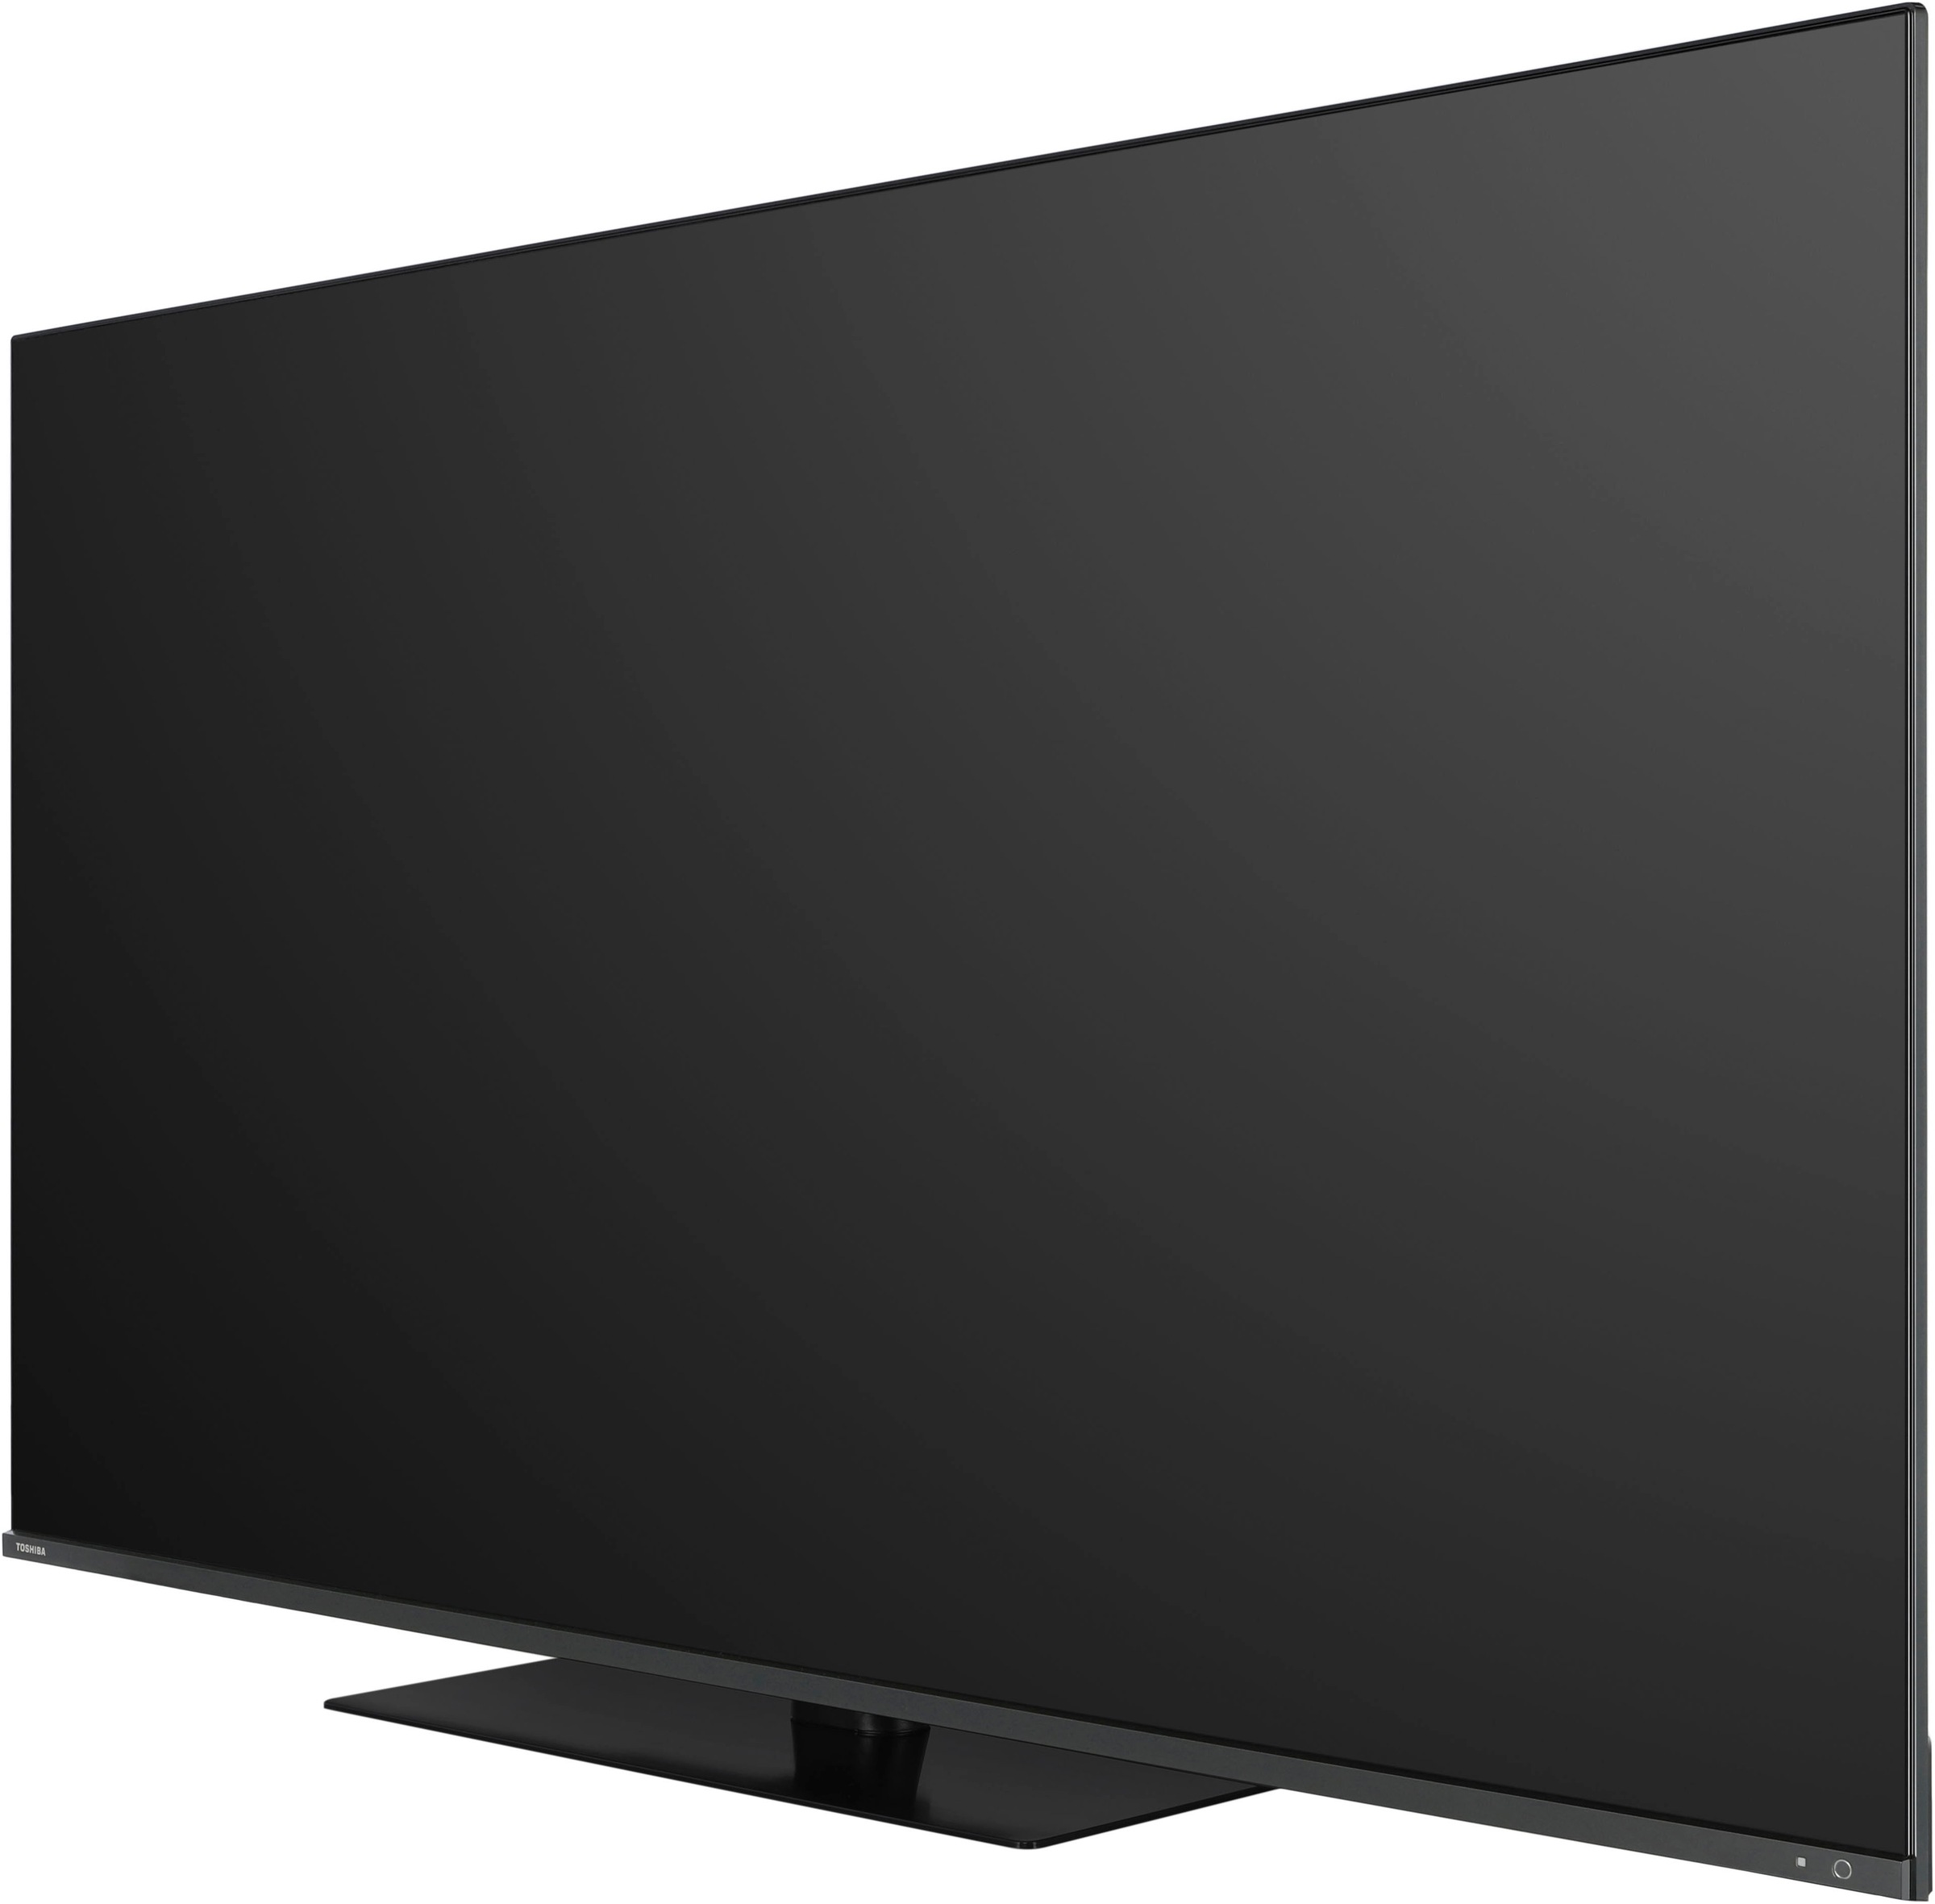 Toshiba LED-Fernseher, 164 cm/65 Zoll, 4K Ultra HD, Smart-TV-Android TV